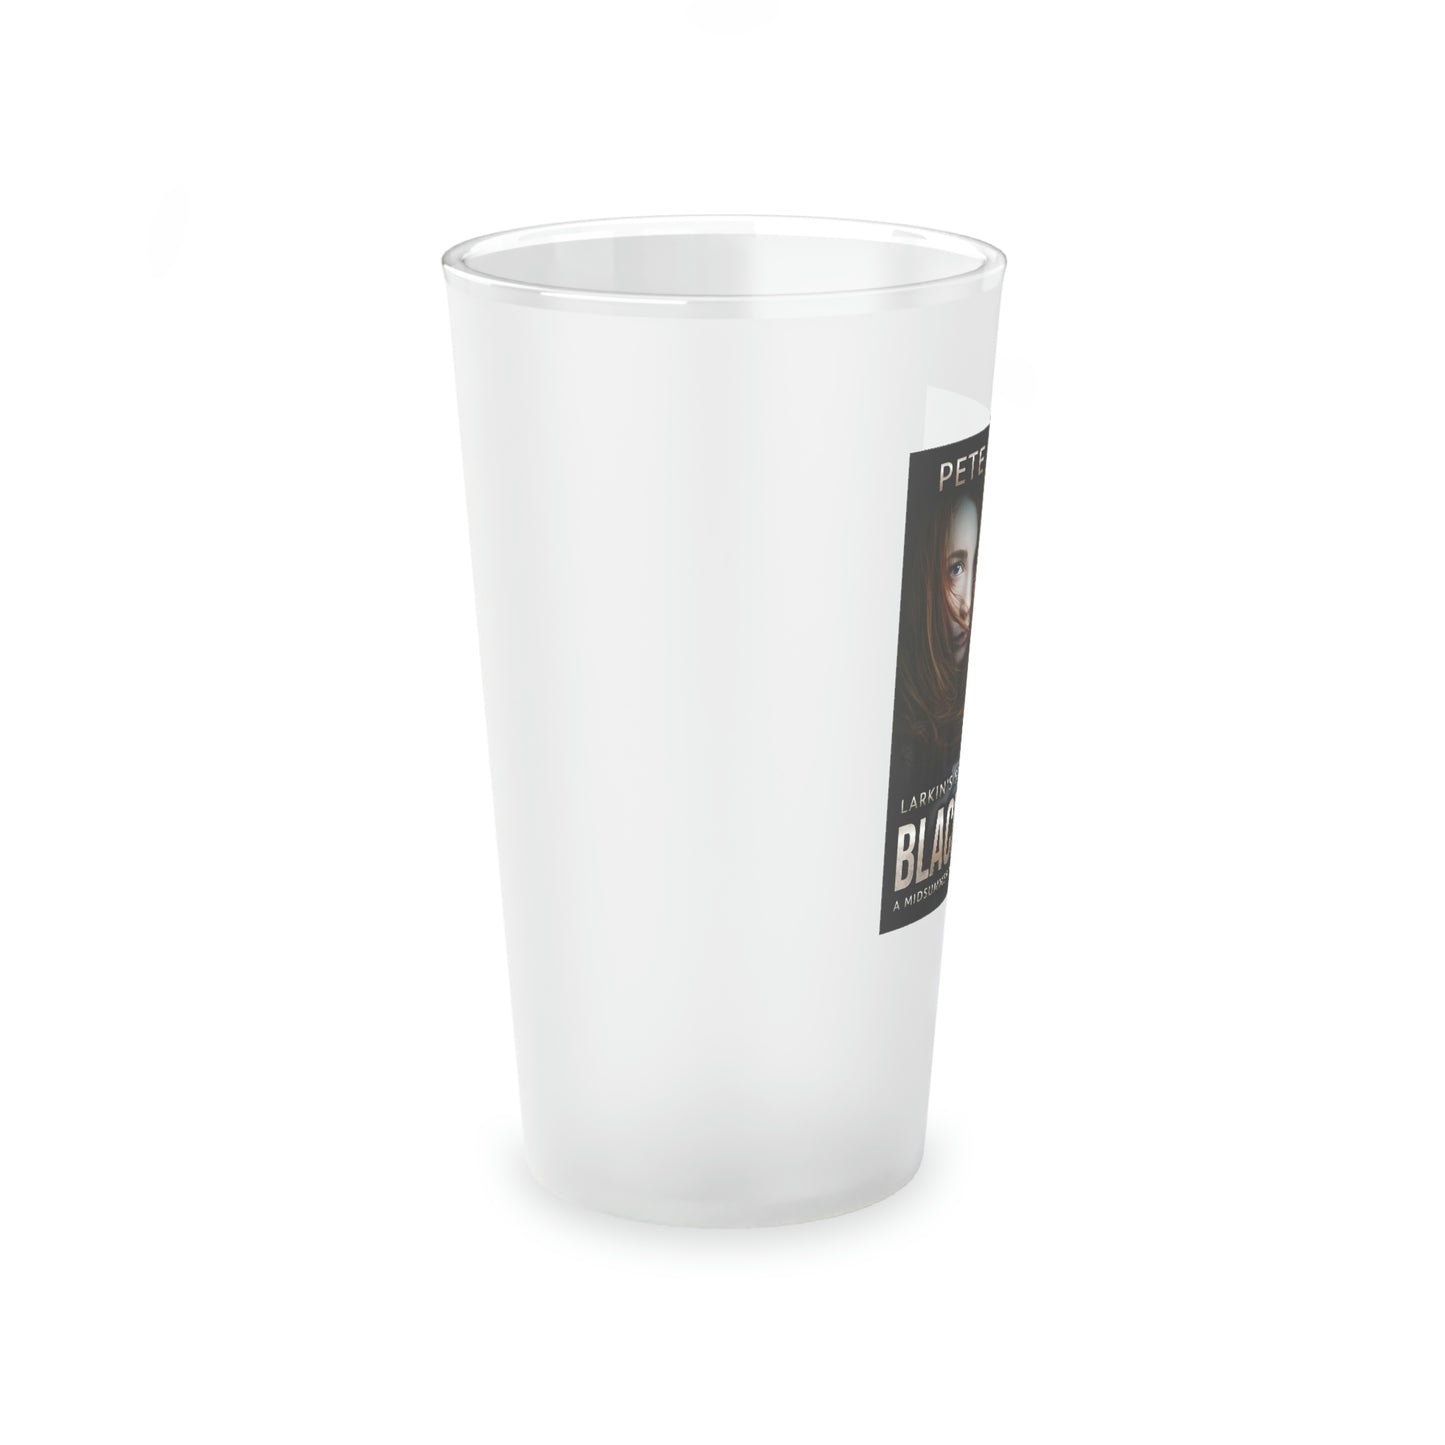 Black Rose - Frosted Pint Glass